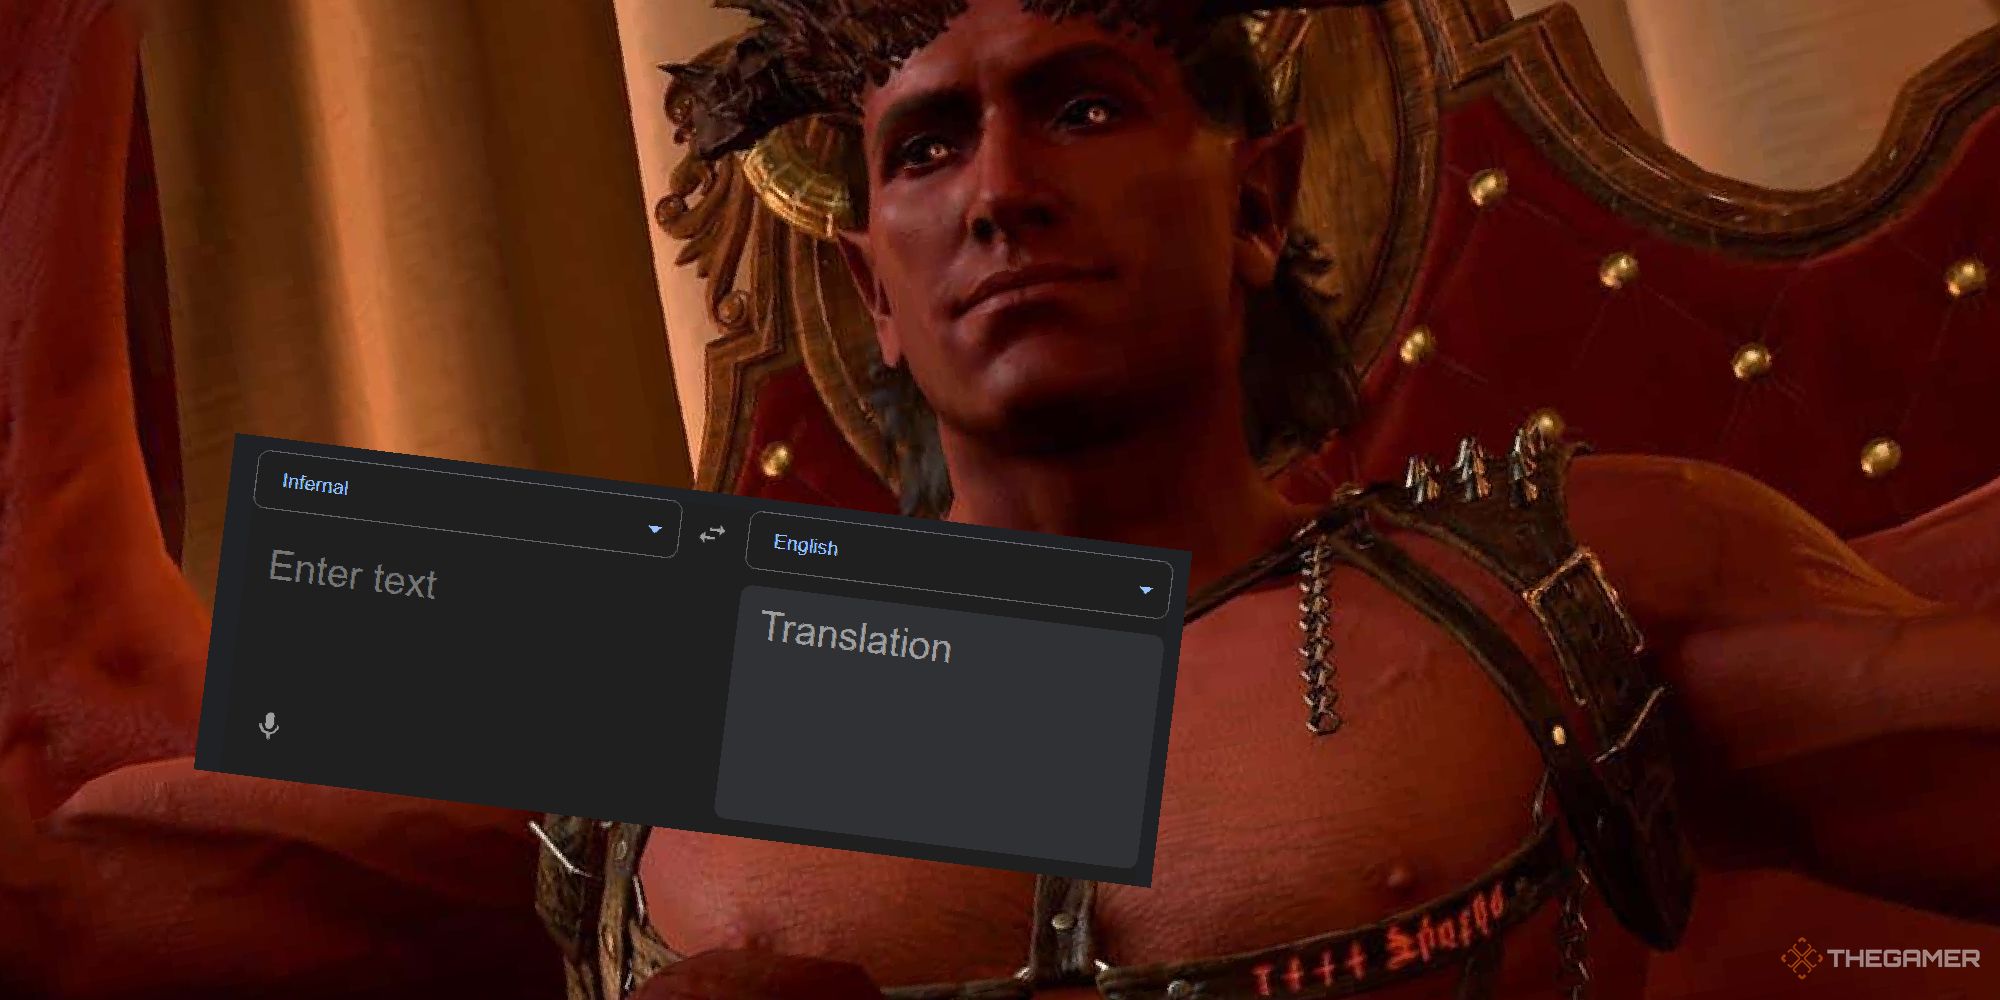 Harleep from Baldurs Gate 3 sitting on a throne in lingerie with a Google Translate box on top, translating Infernal to English